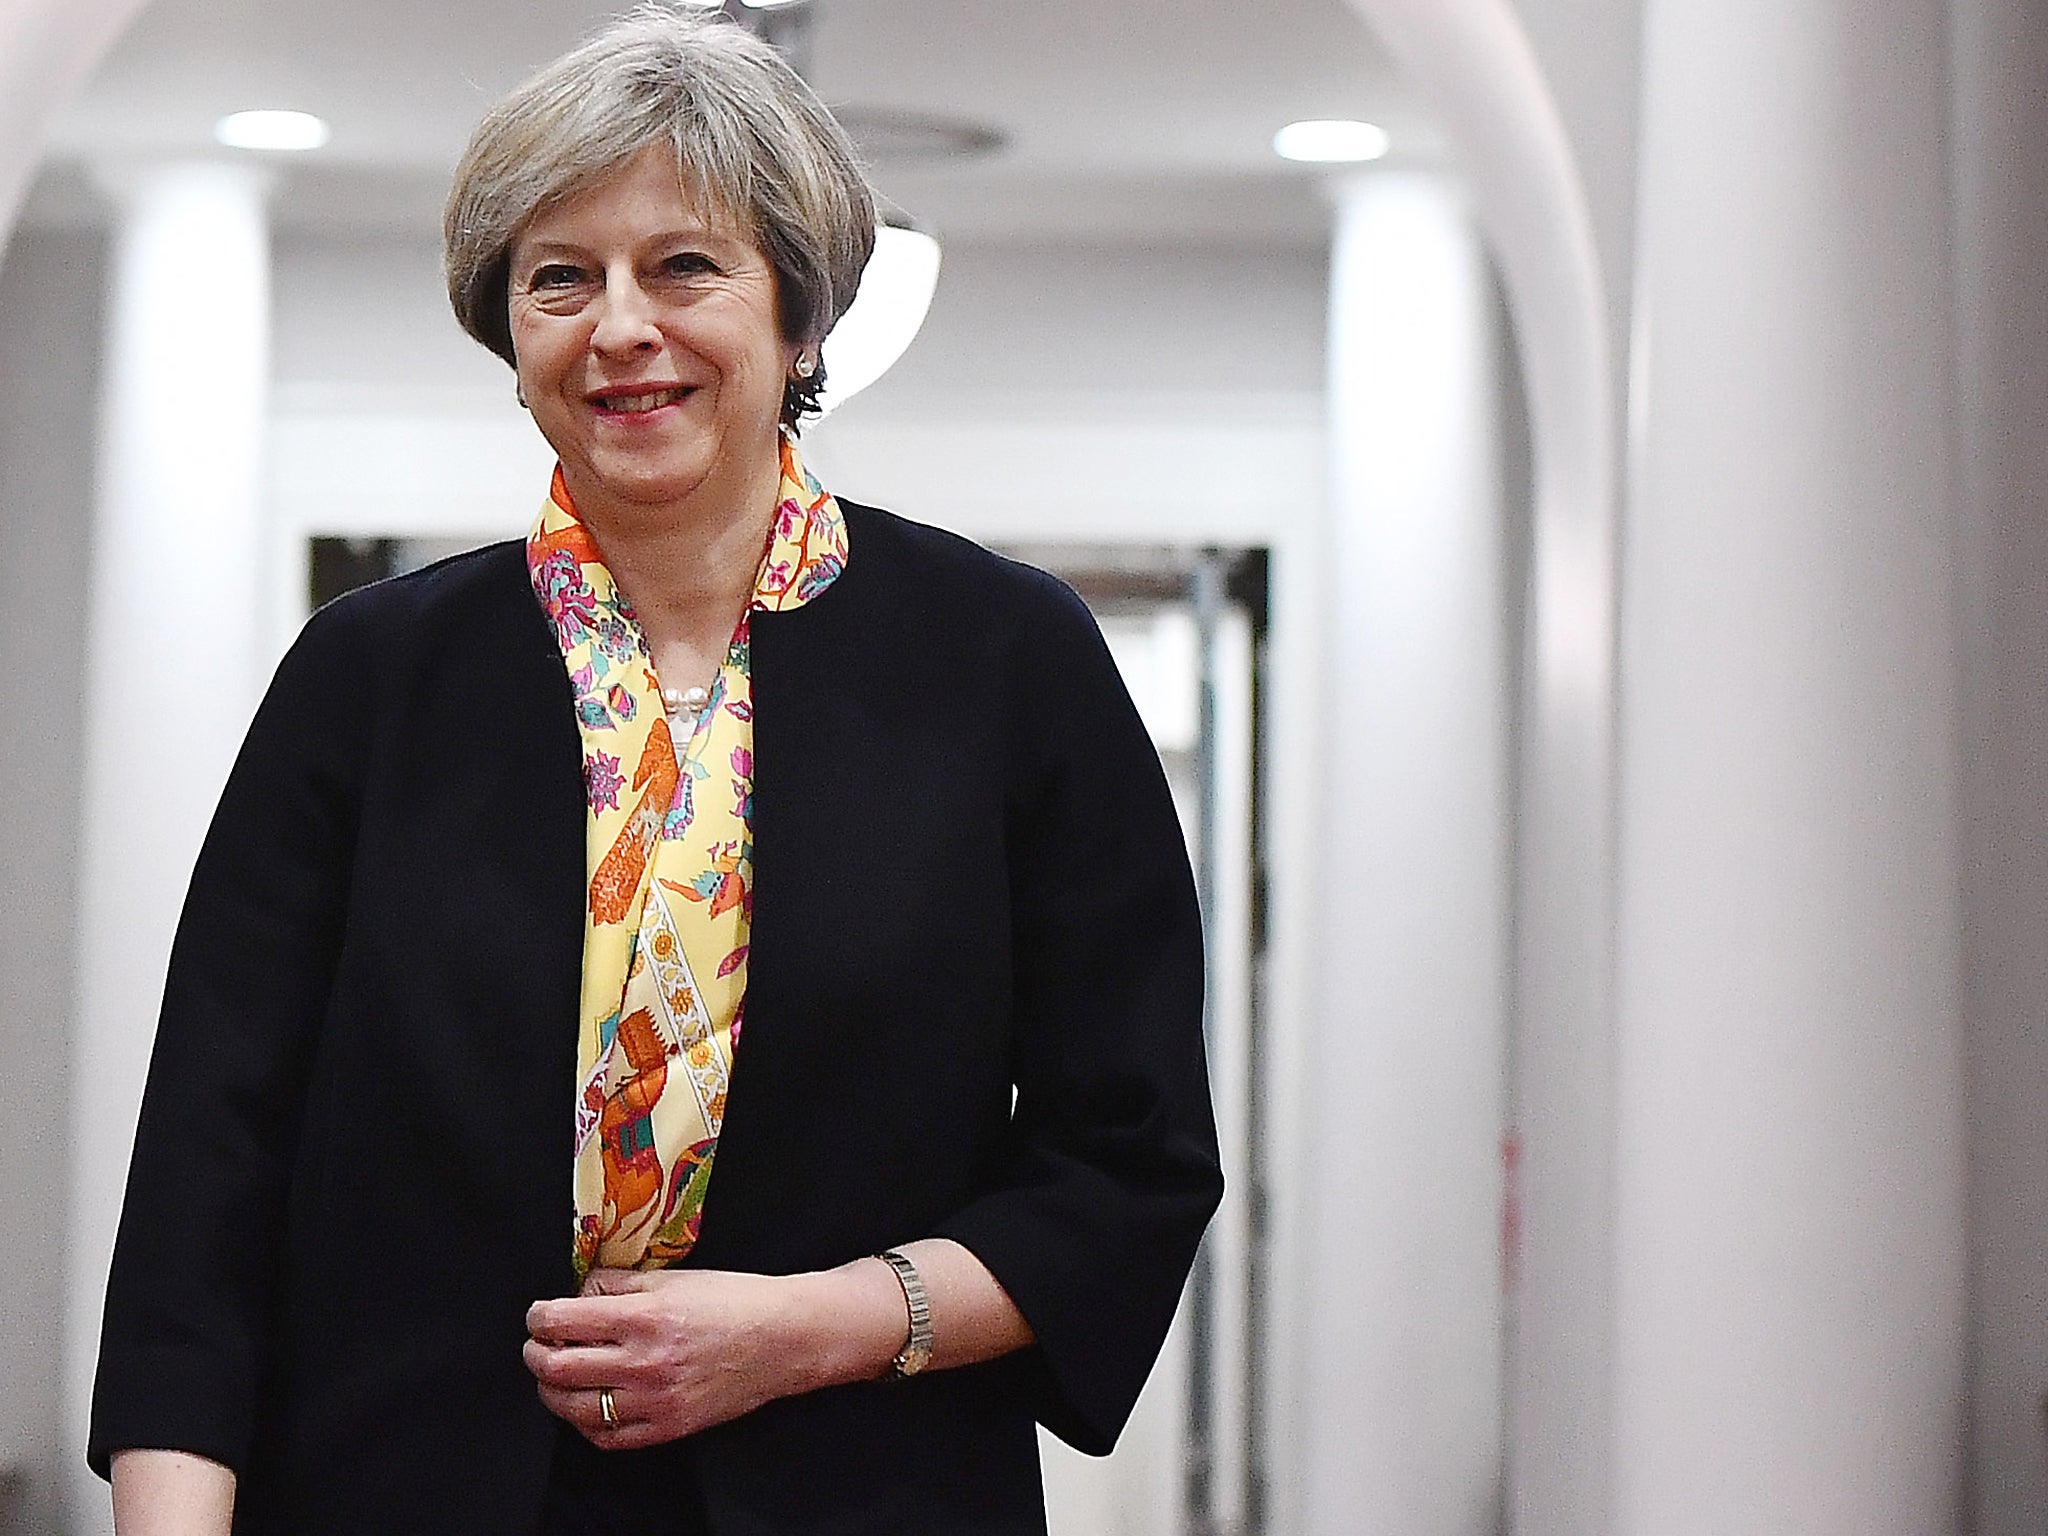 Theresa May once warned against ‘the nasty party’, but have times changed?